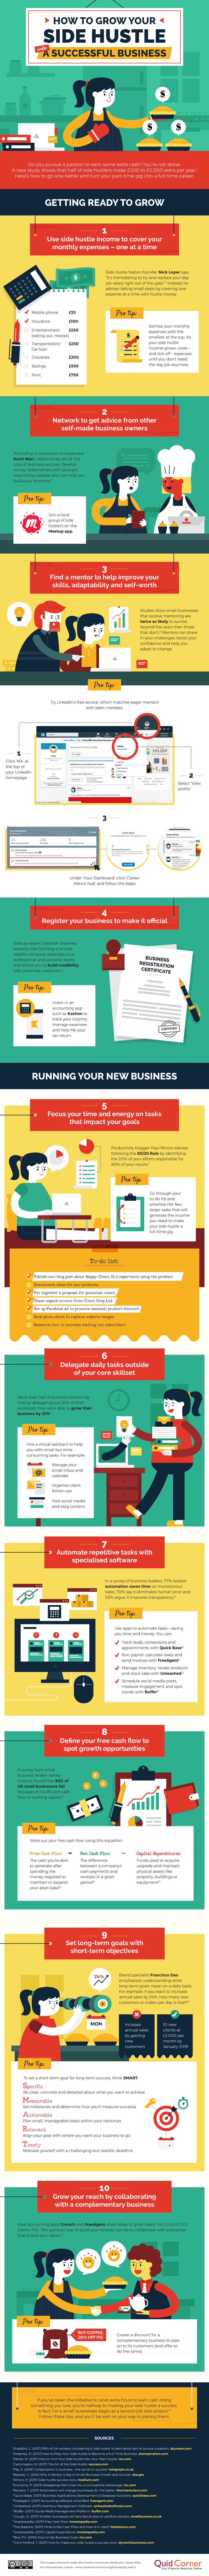 How to Grow Your Side Hustle into a Successful Business - #infographic